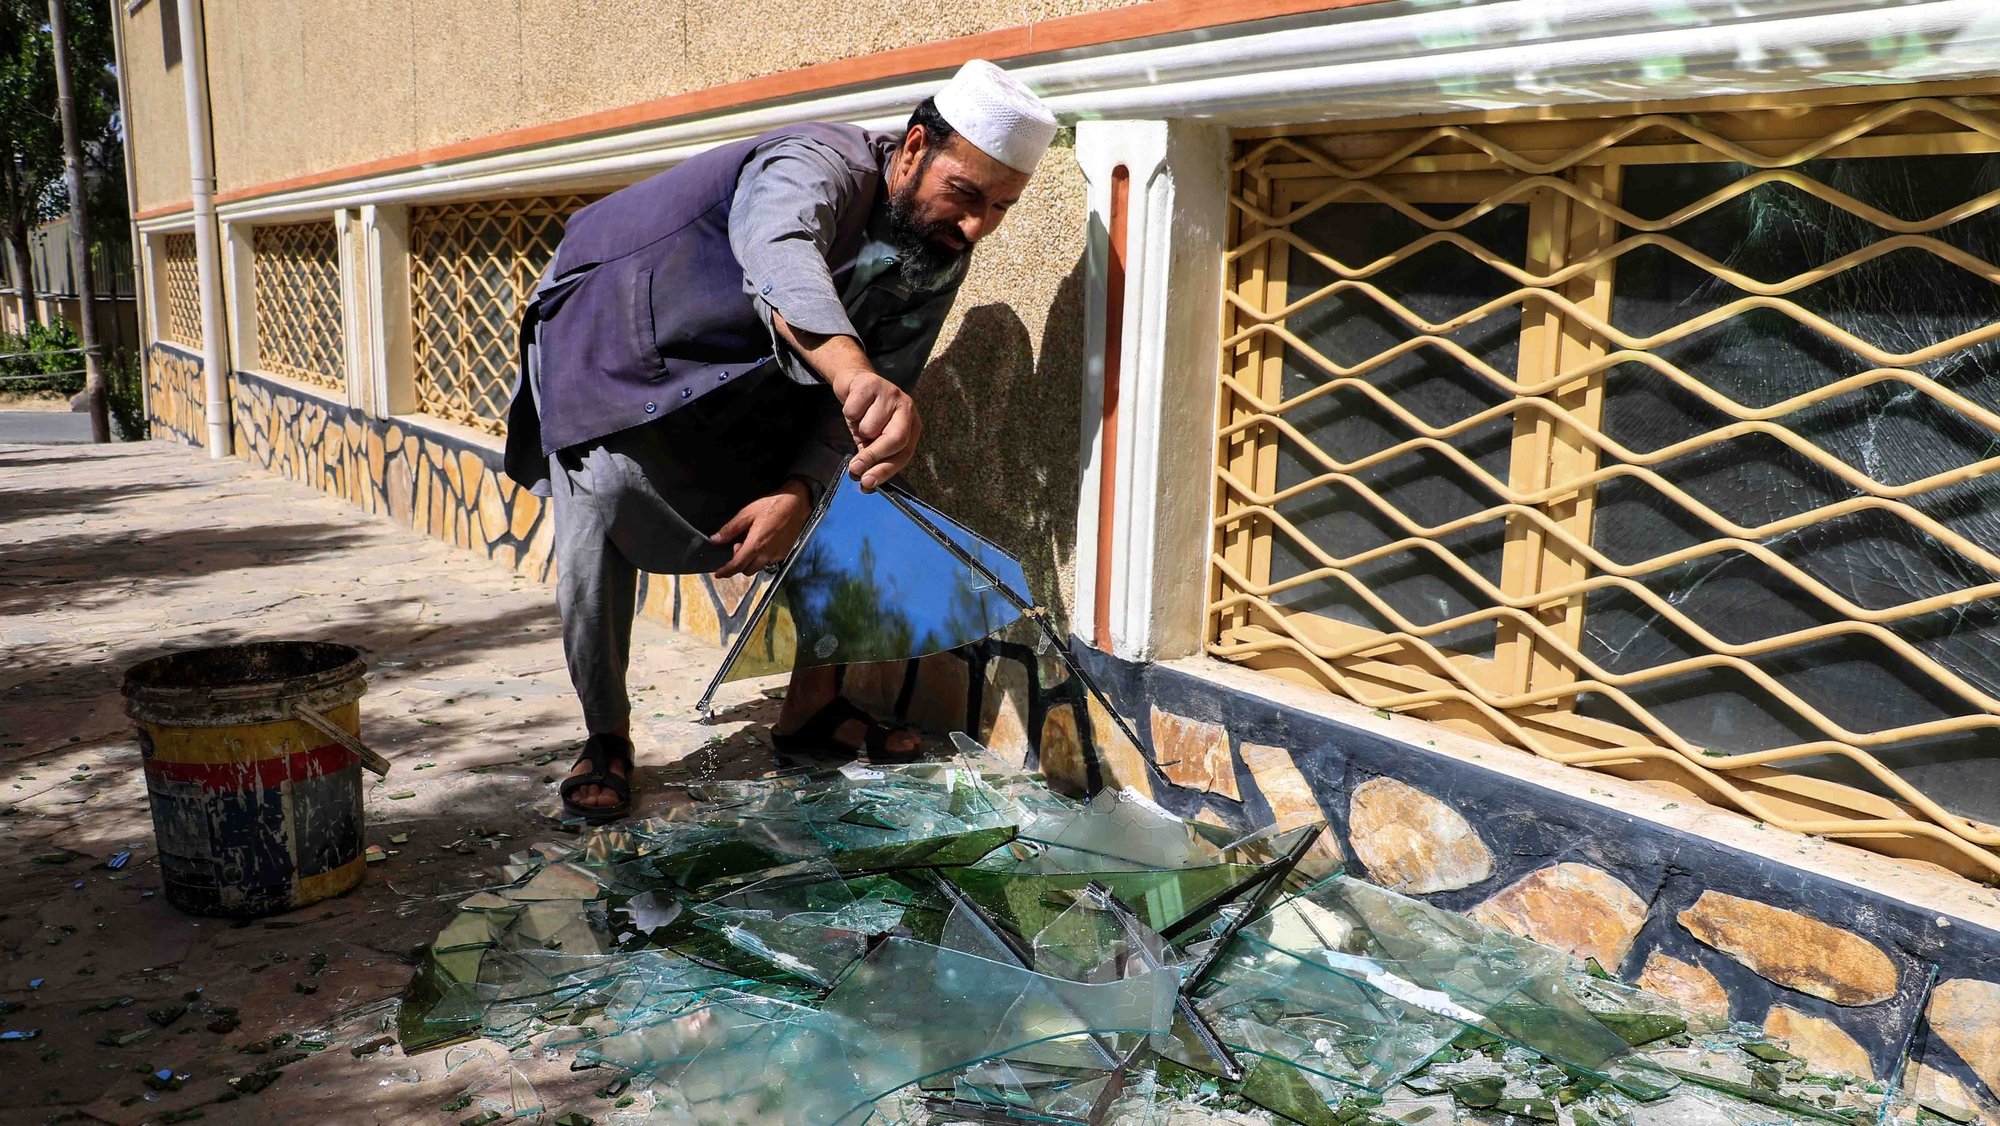 epa10020352 An Afghan man collects shattered window panes at the scene of an explosion in front of a Sikh temple, in Kabul, Afghanistan, 18 June 2022. Suicide attackers stormed a Sikh temple in the Afghan capital on 18 June morning, sparking a gun battle in which two people lost their lives, police said. &#039;The attack on the (Sikh) shrine ended with the elimination of the insurgents&#039;, Kabul police spokesperson Khalid Zadran said.  EPA/STRINGER